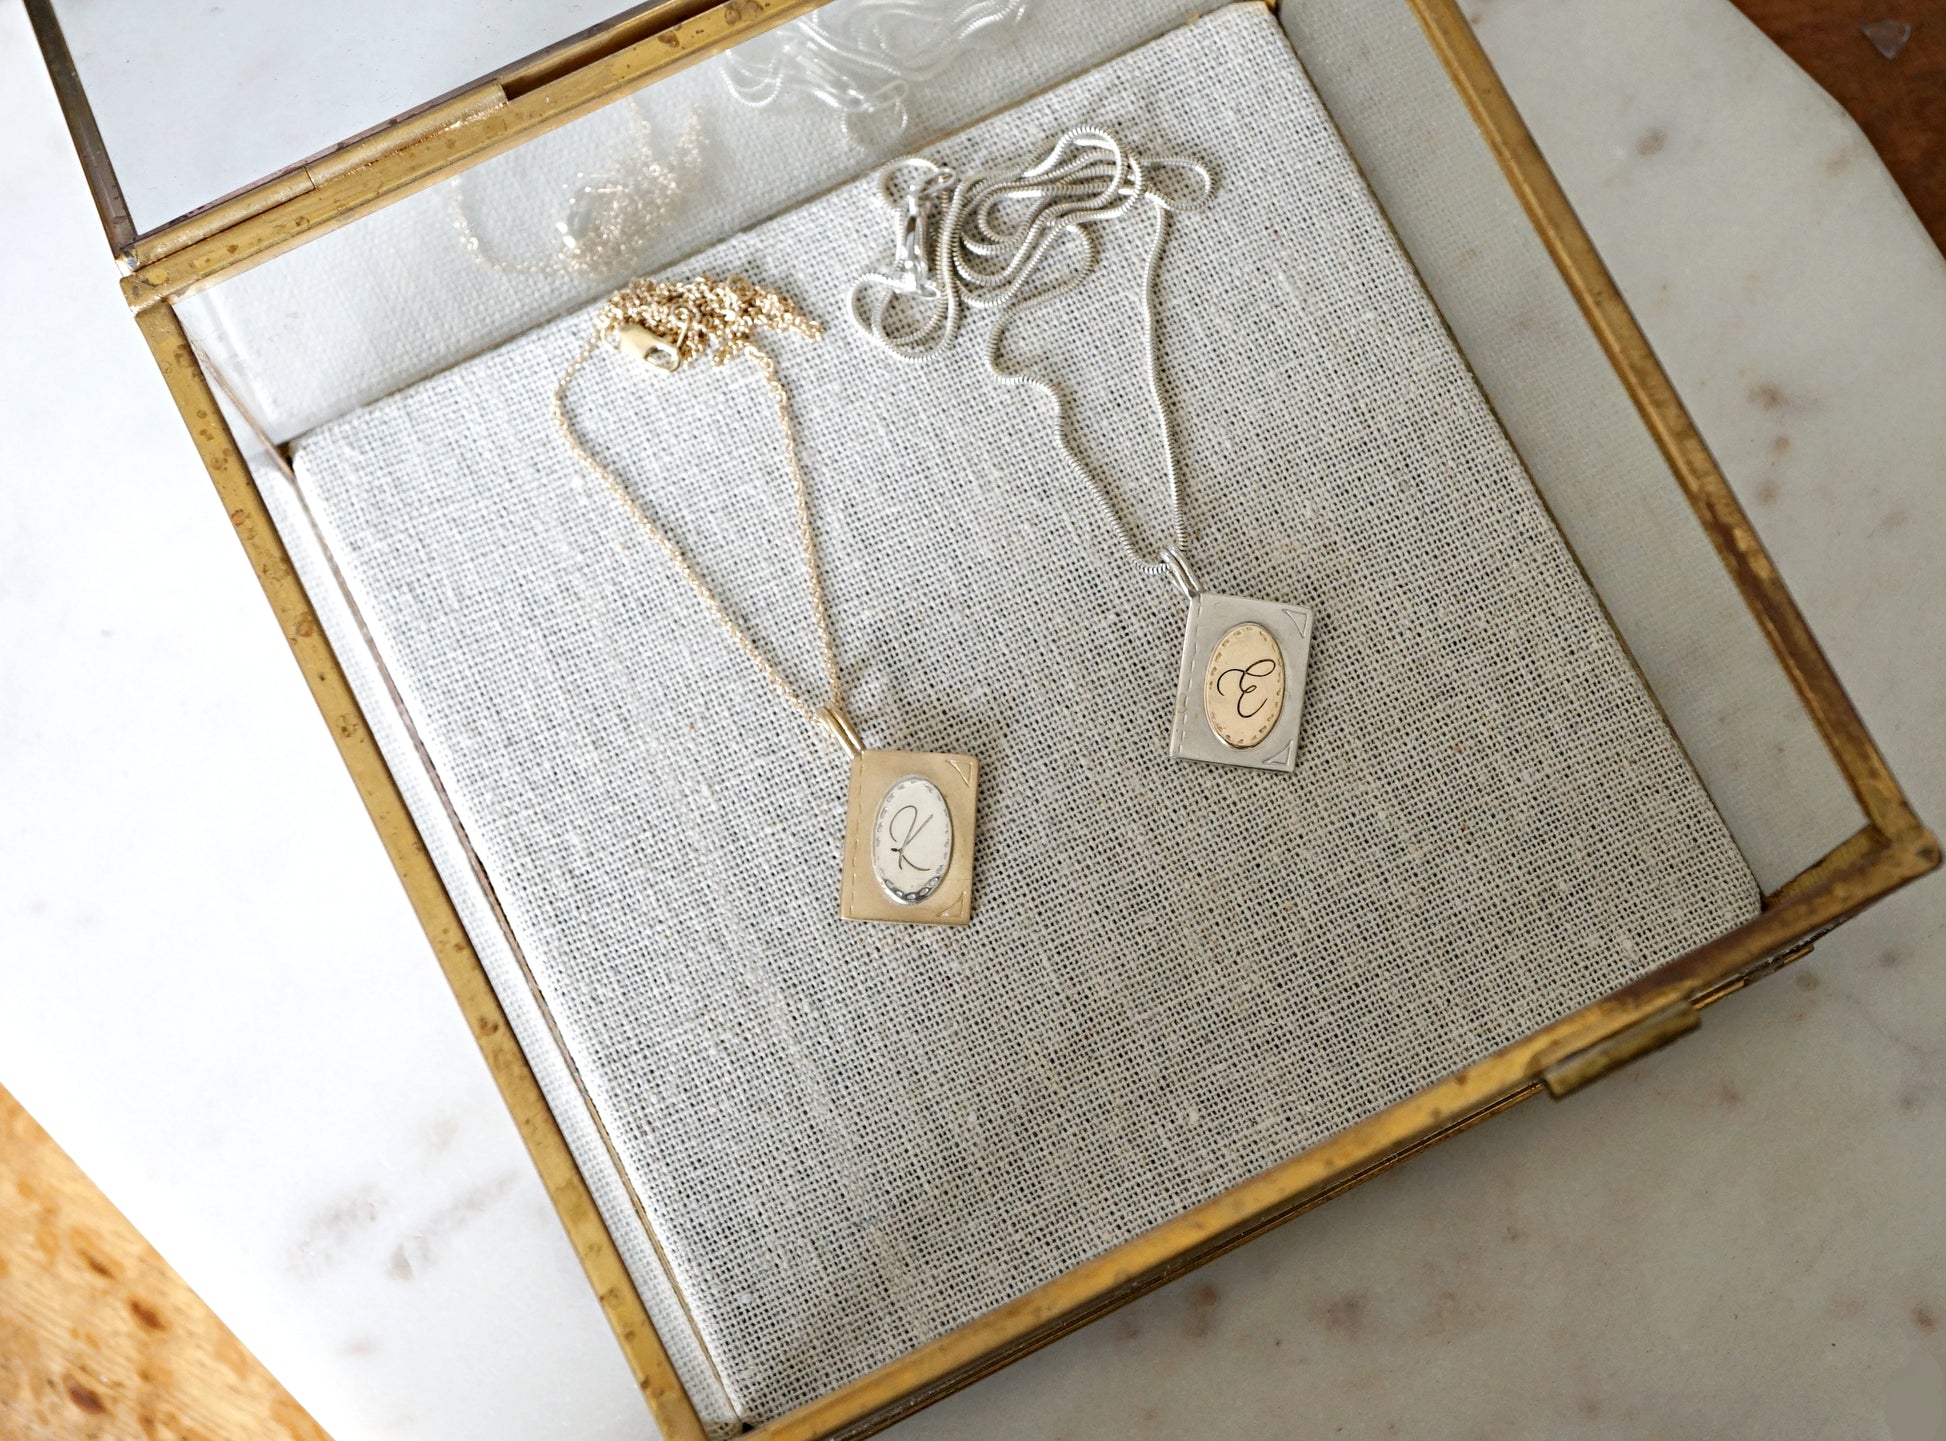 Initial book pendant necklace-14k gold